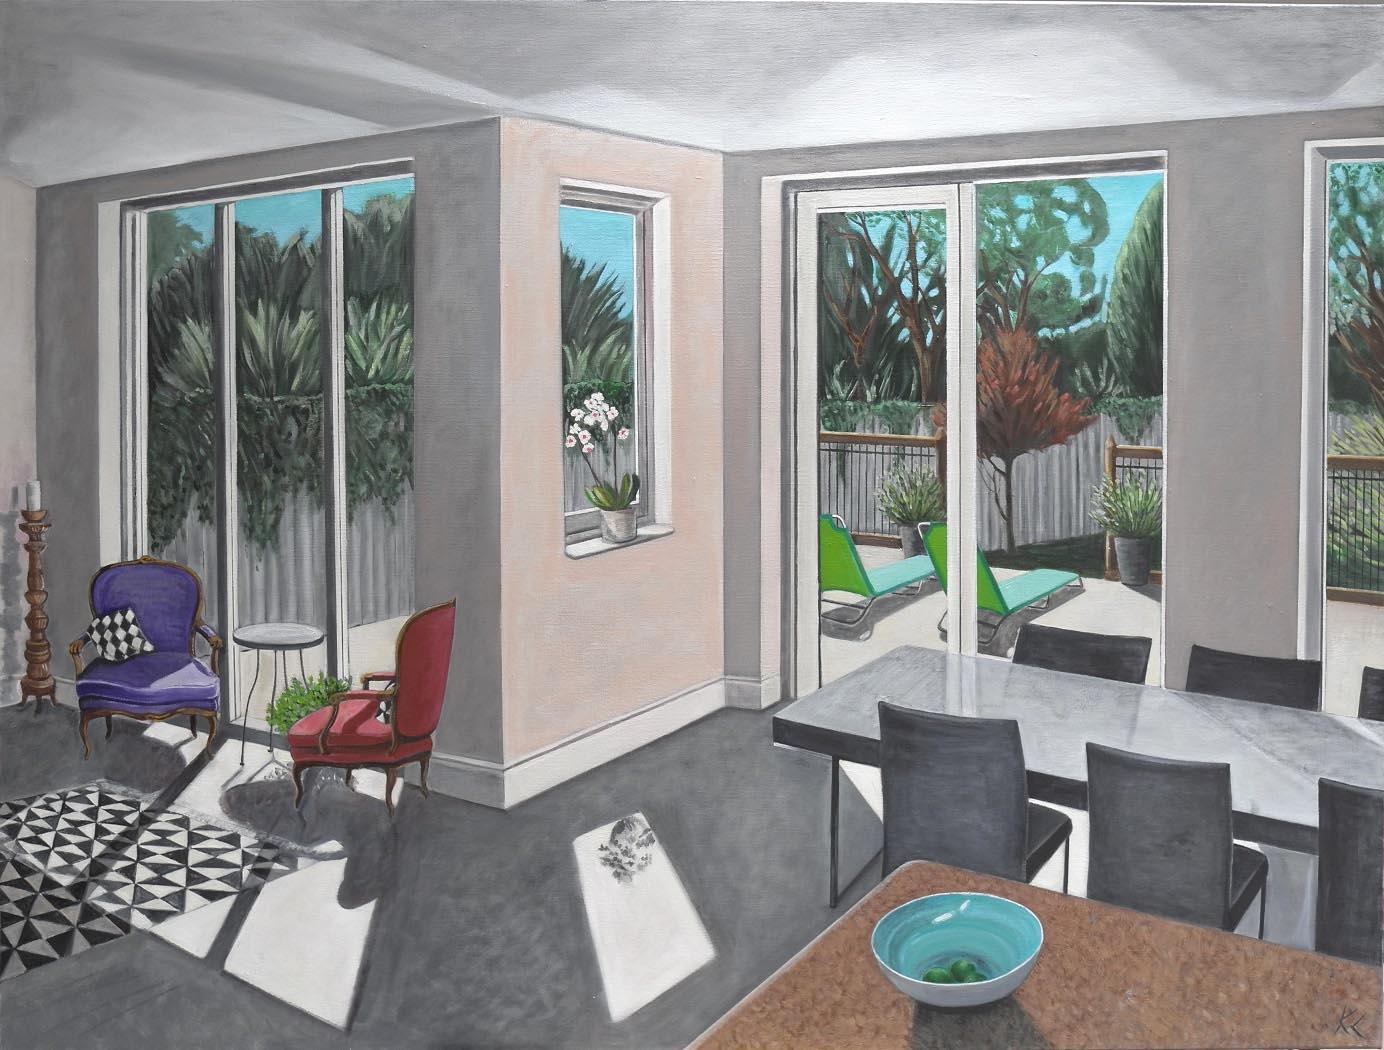 Karen Lynn Interior Painting - Saturday Afternoon - Architectural interior oil painting